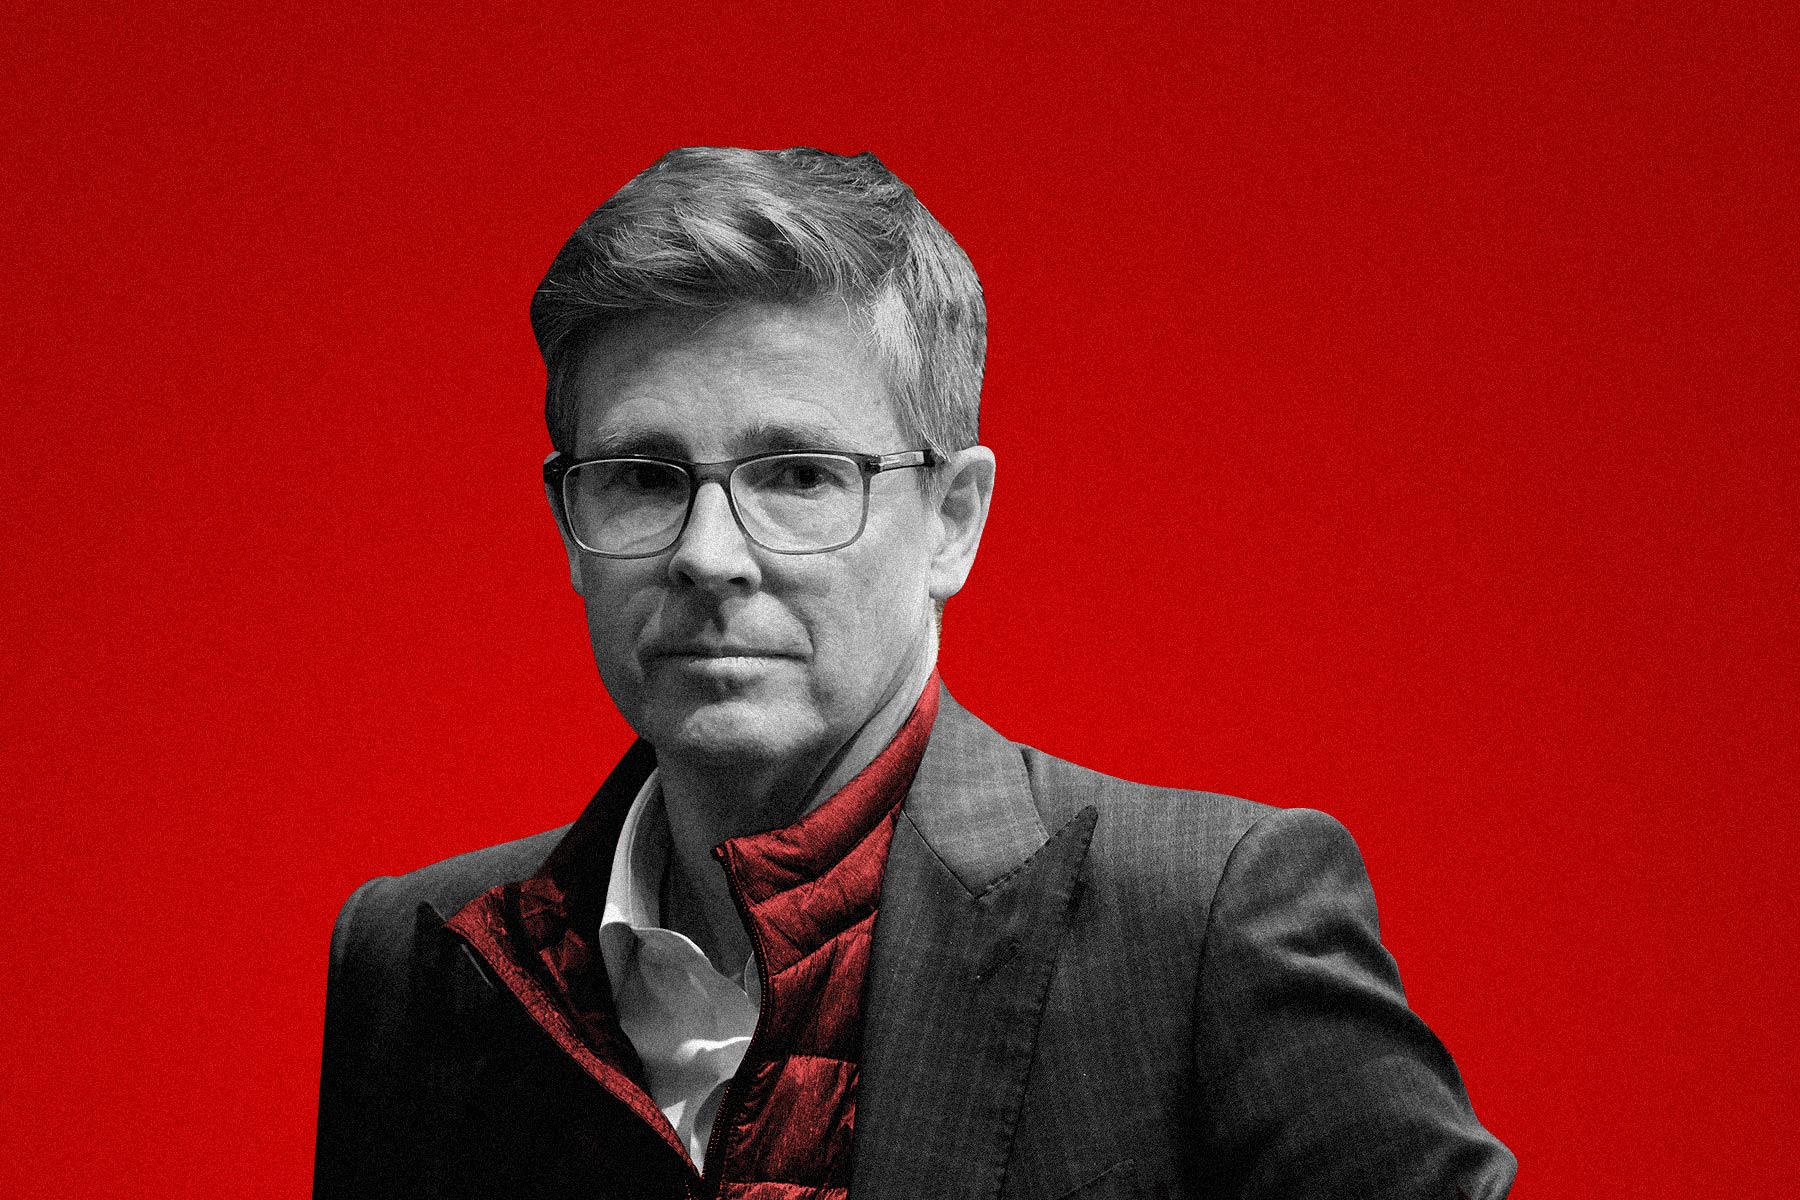 A black-and-white photo of Galen Weston Jr. wearing a red vest against a red backdrop.